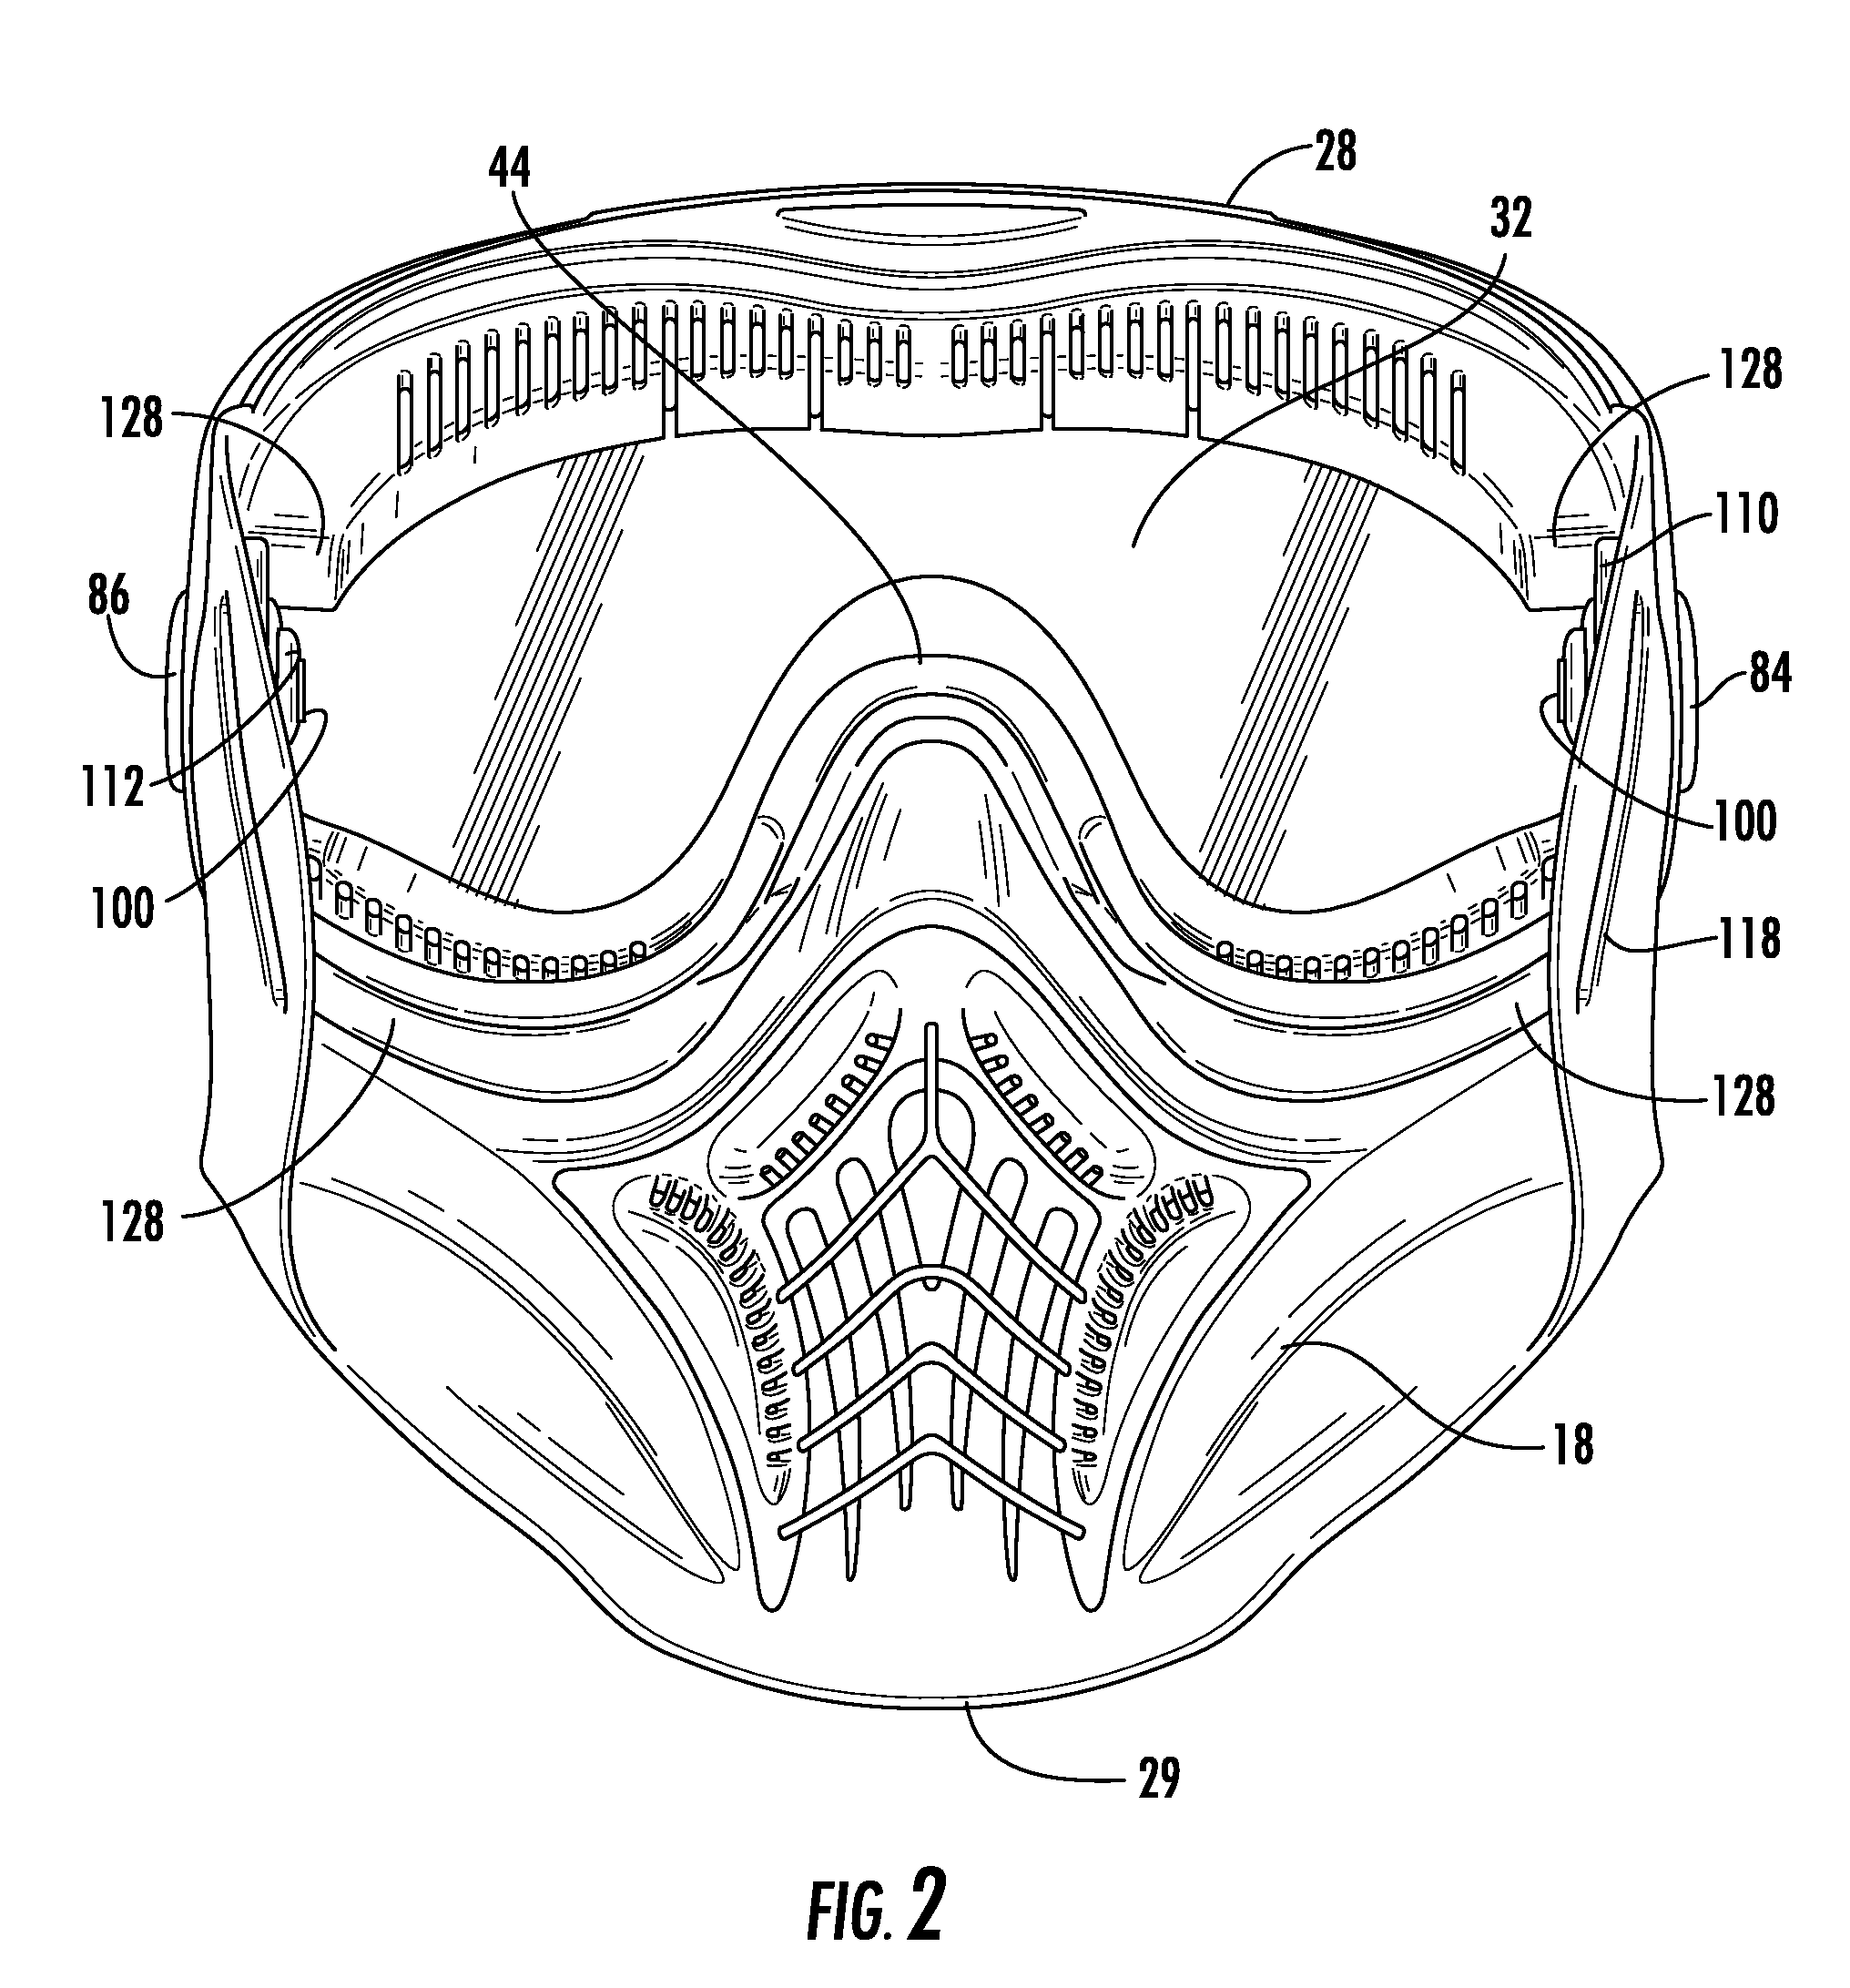 Face mask and goggle system